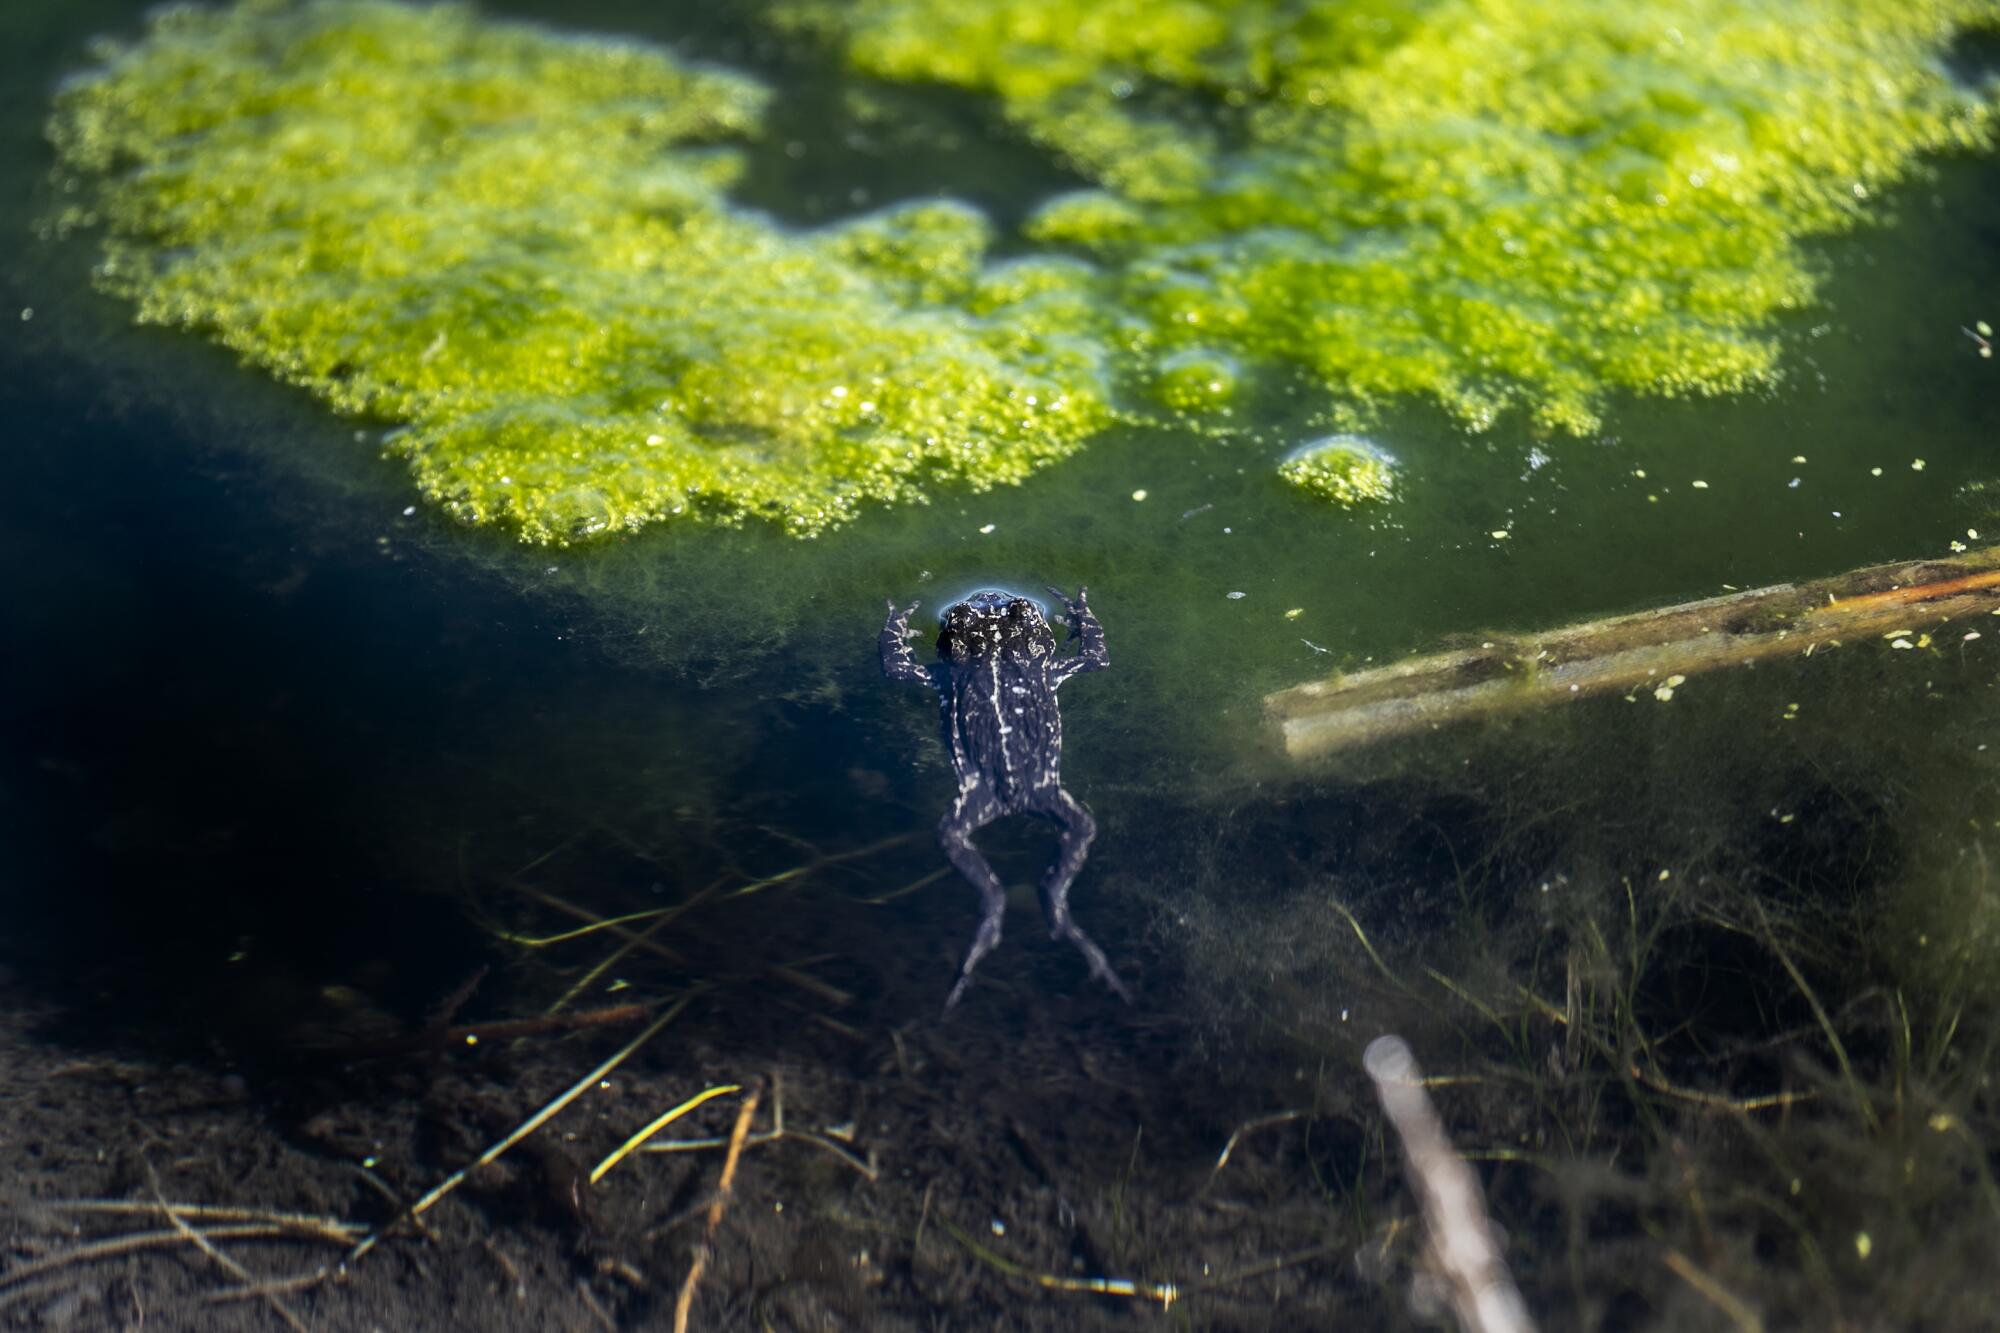 A black toad floats in the water 